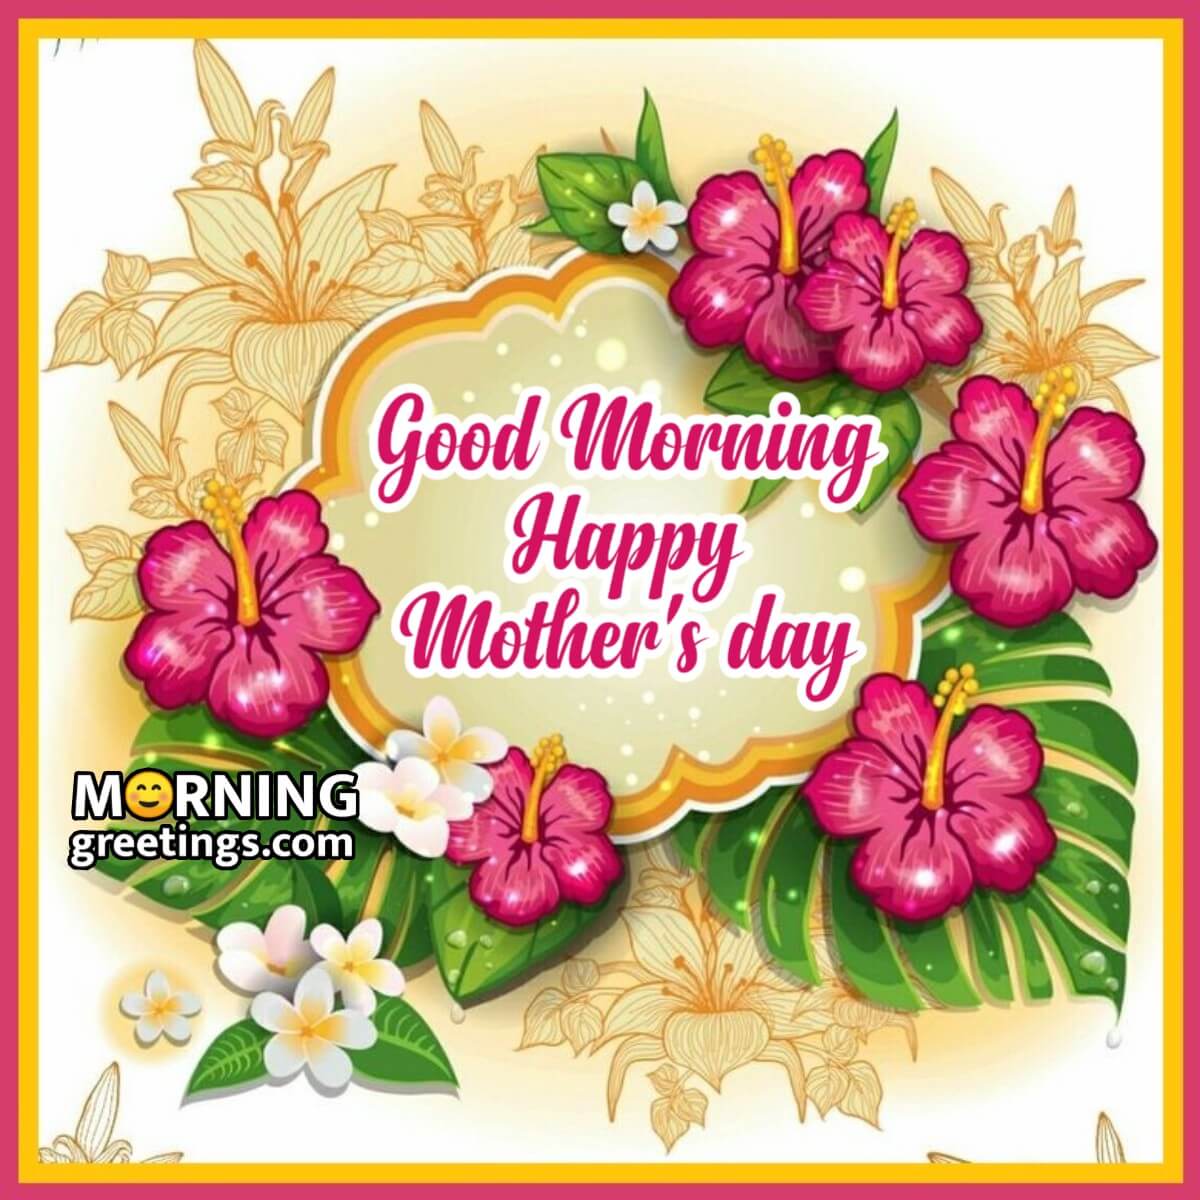 Good Morning Happy Mother’s Day Greeting Card